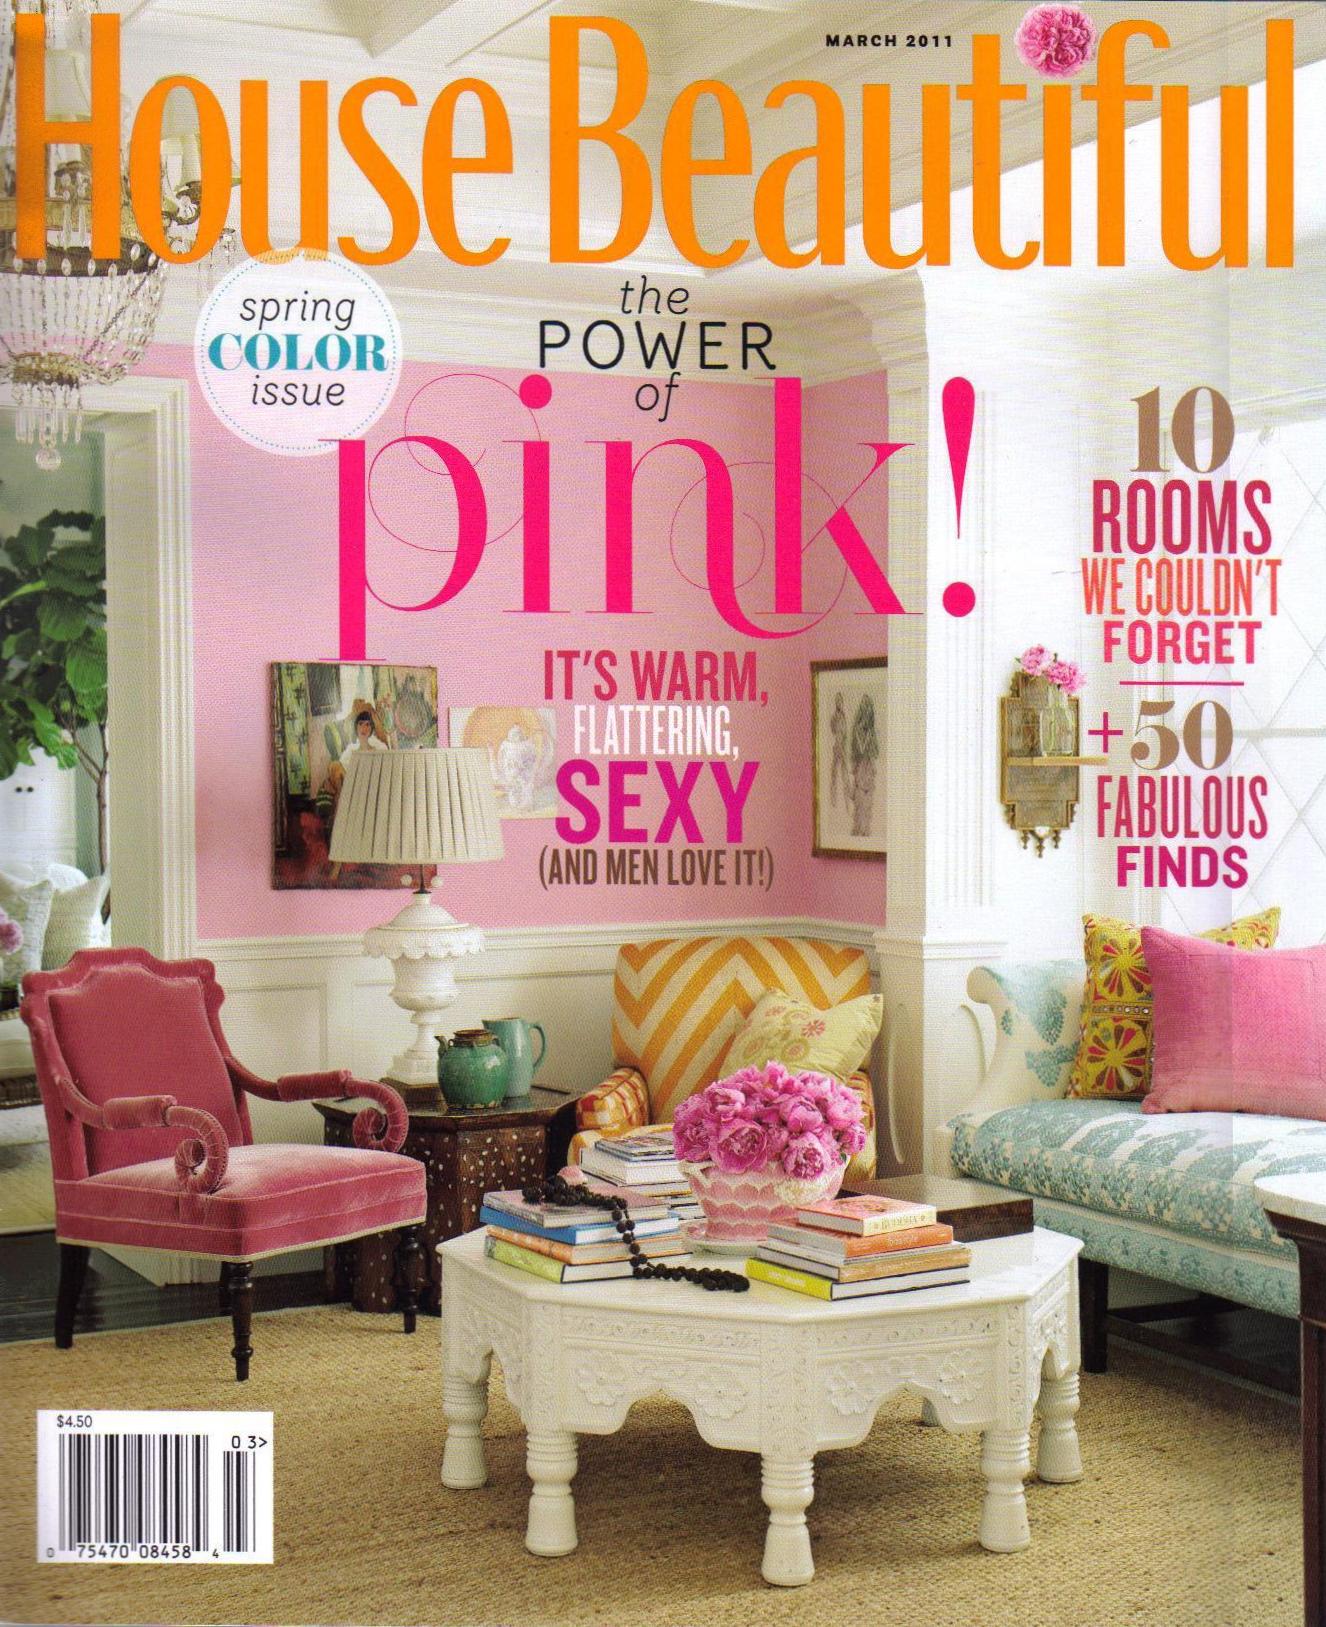 House Beautiful / March 2011